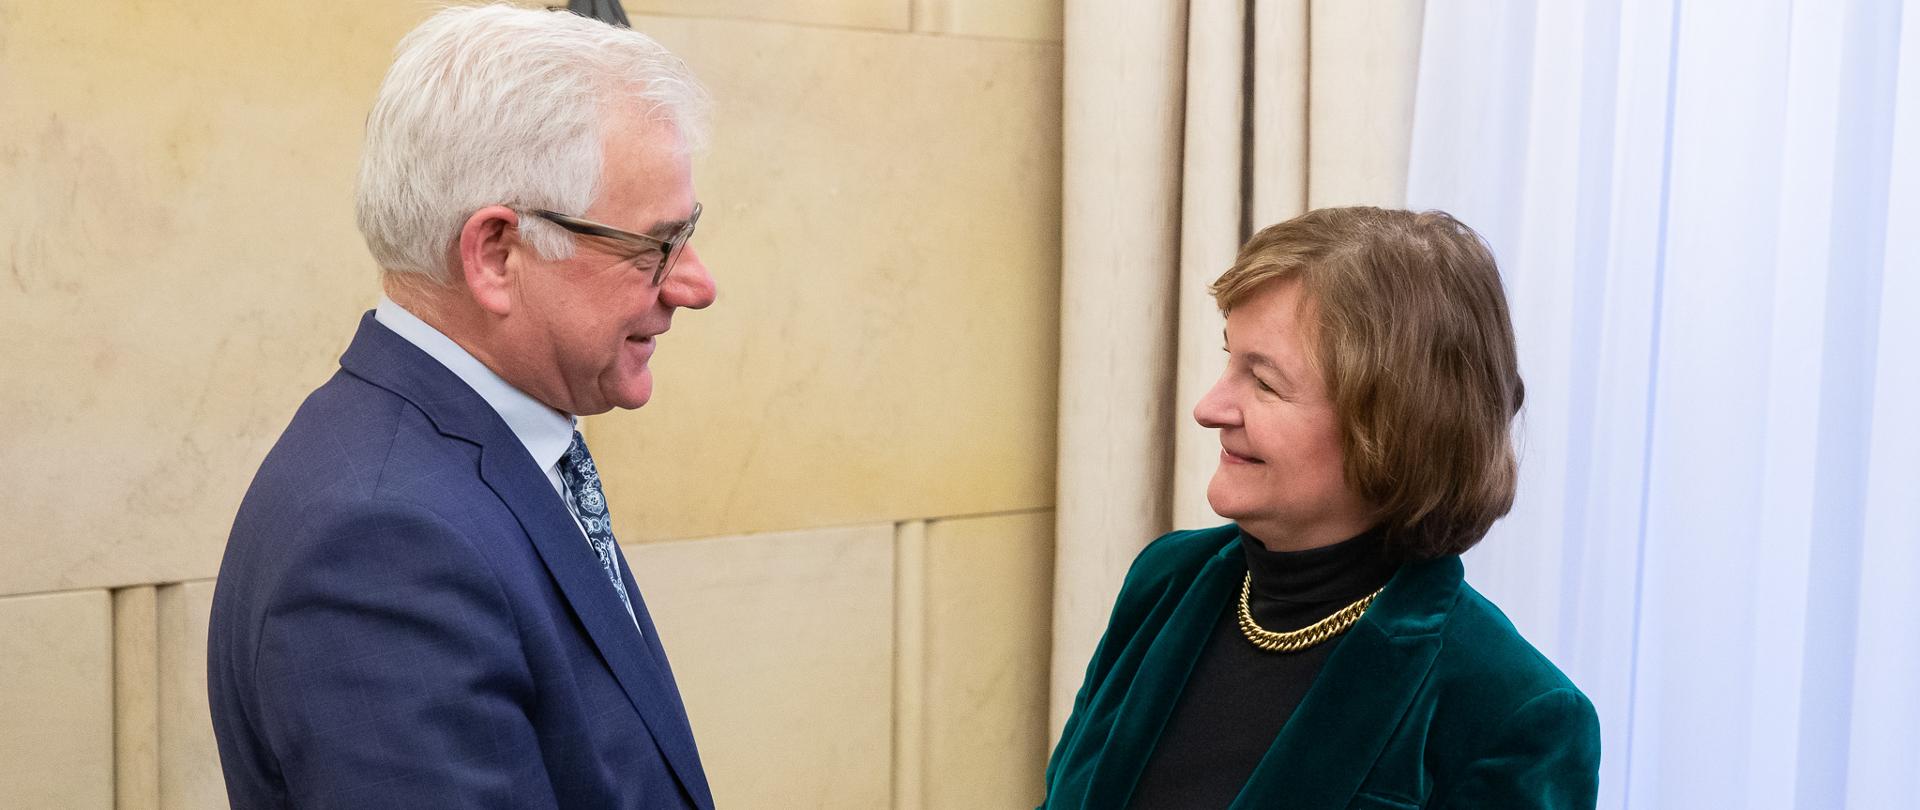 Minister Jacek Czaputowicz meets with French Minister of European Affairs Nathalie Loiseau